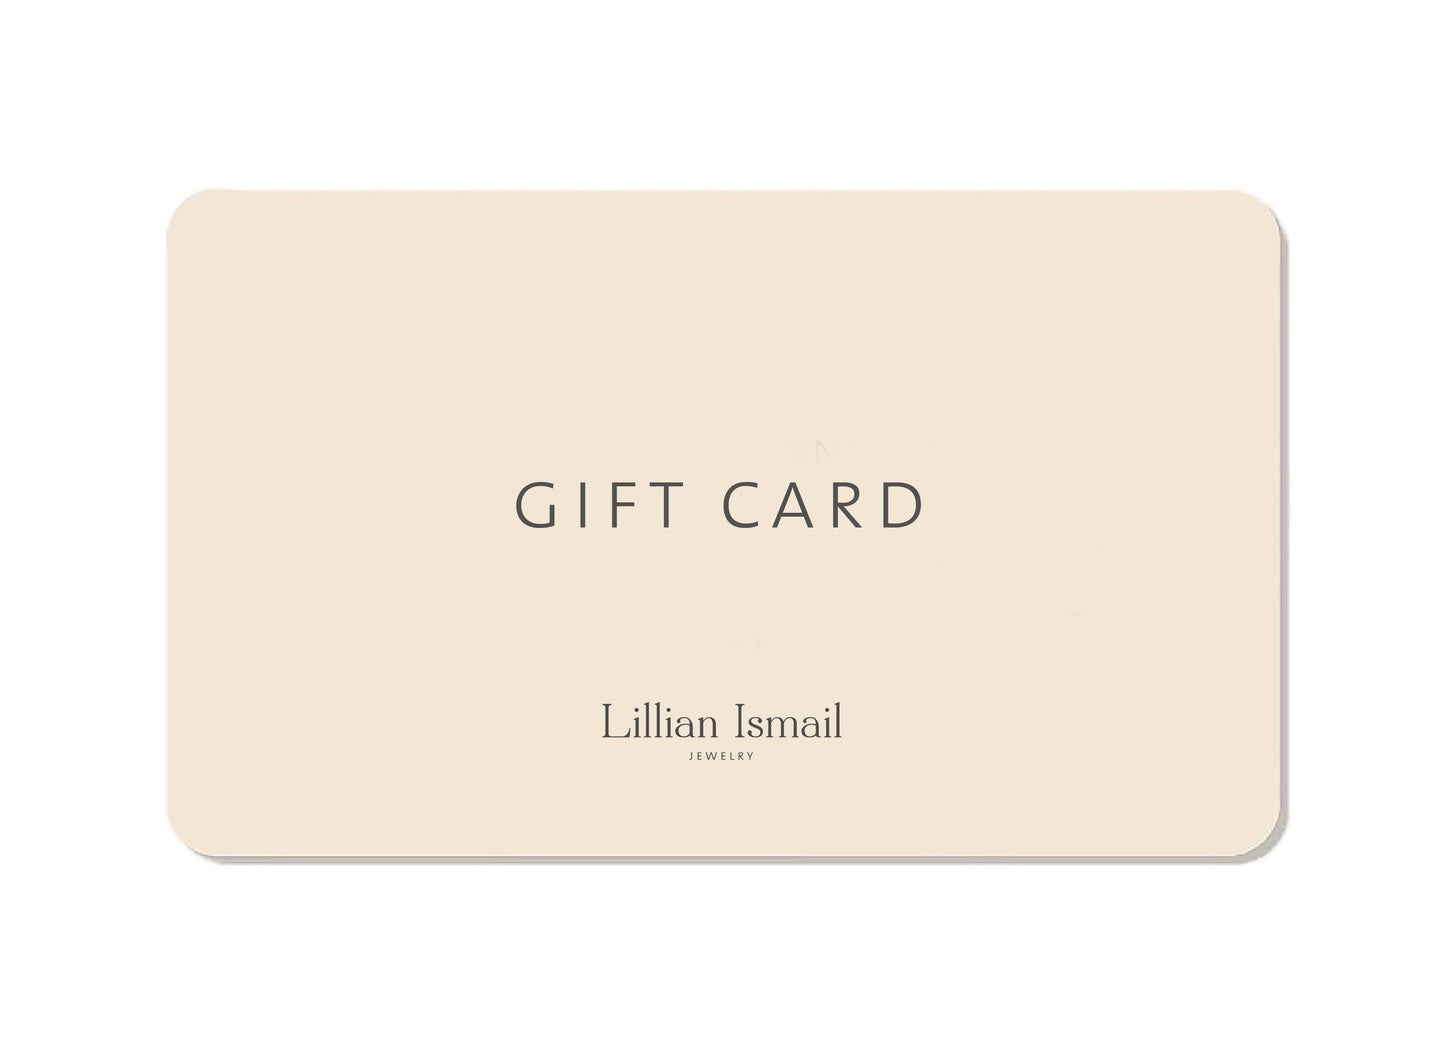 Lillian Ismail Jewelry Gift Card